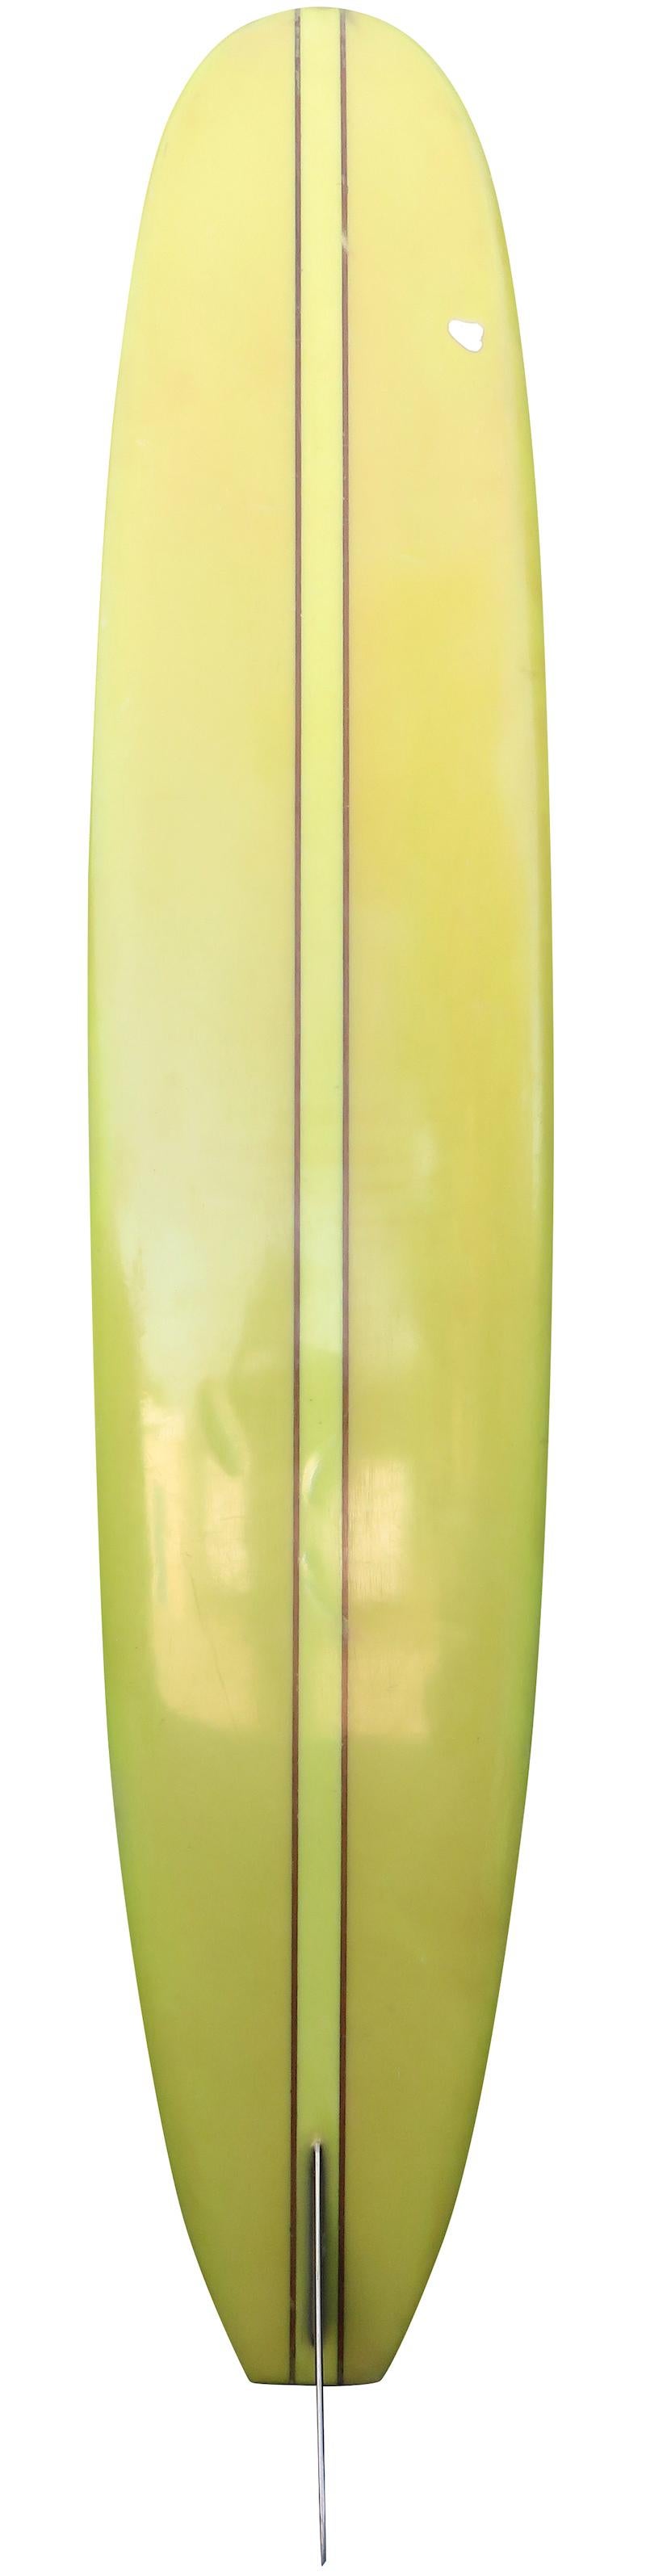 Mid 1960s “The Personal” longboard by South Coast. Features a redwood double stringer design, lime green tinted rails and bottom, and black fin with white halo. A great example of a 1960s classic longboard. This vintage surfboard remains in all